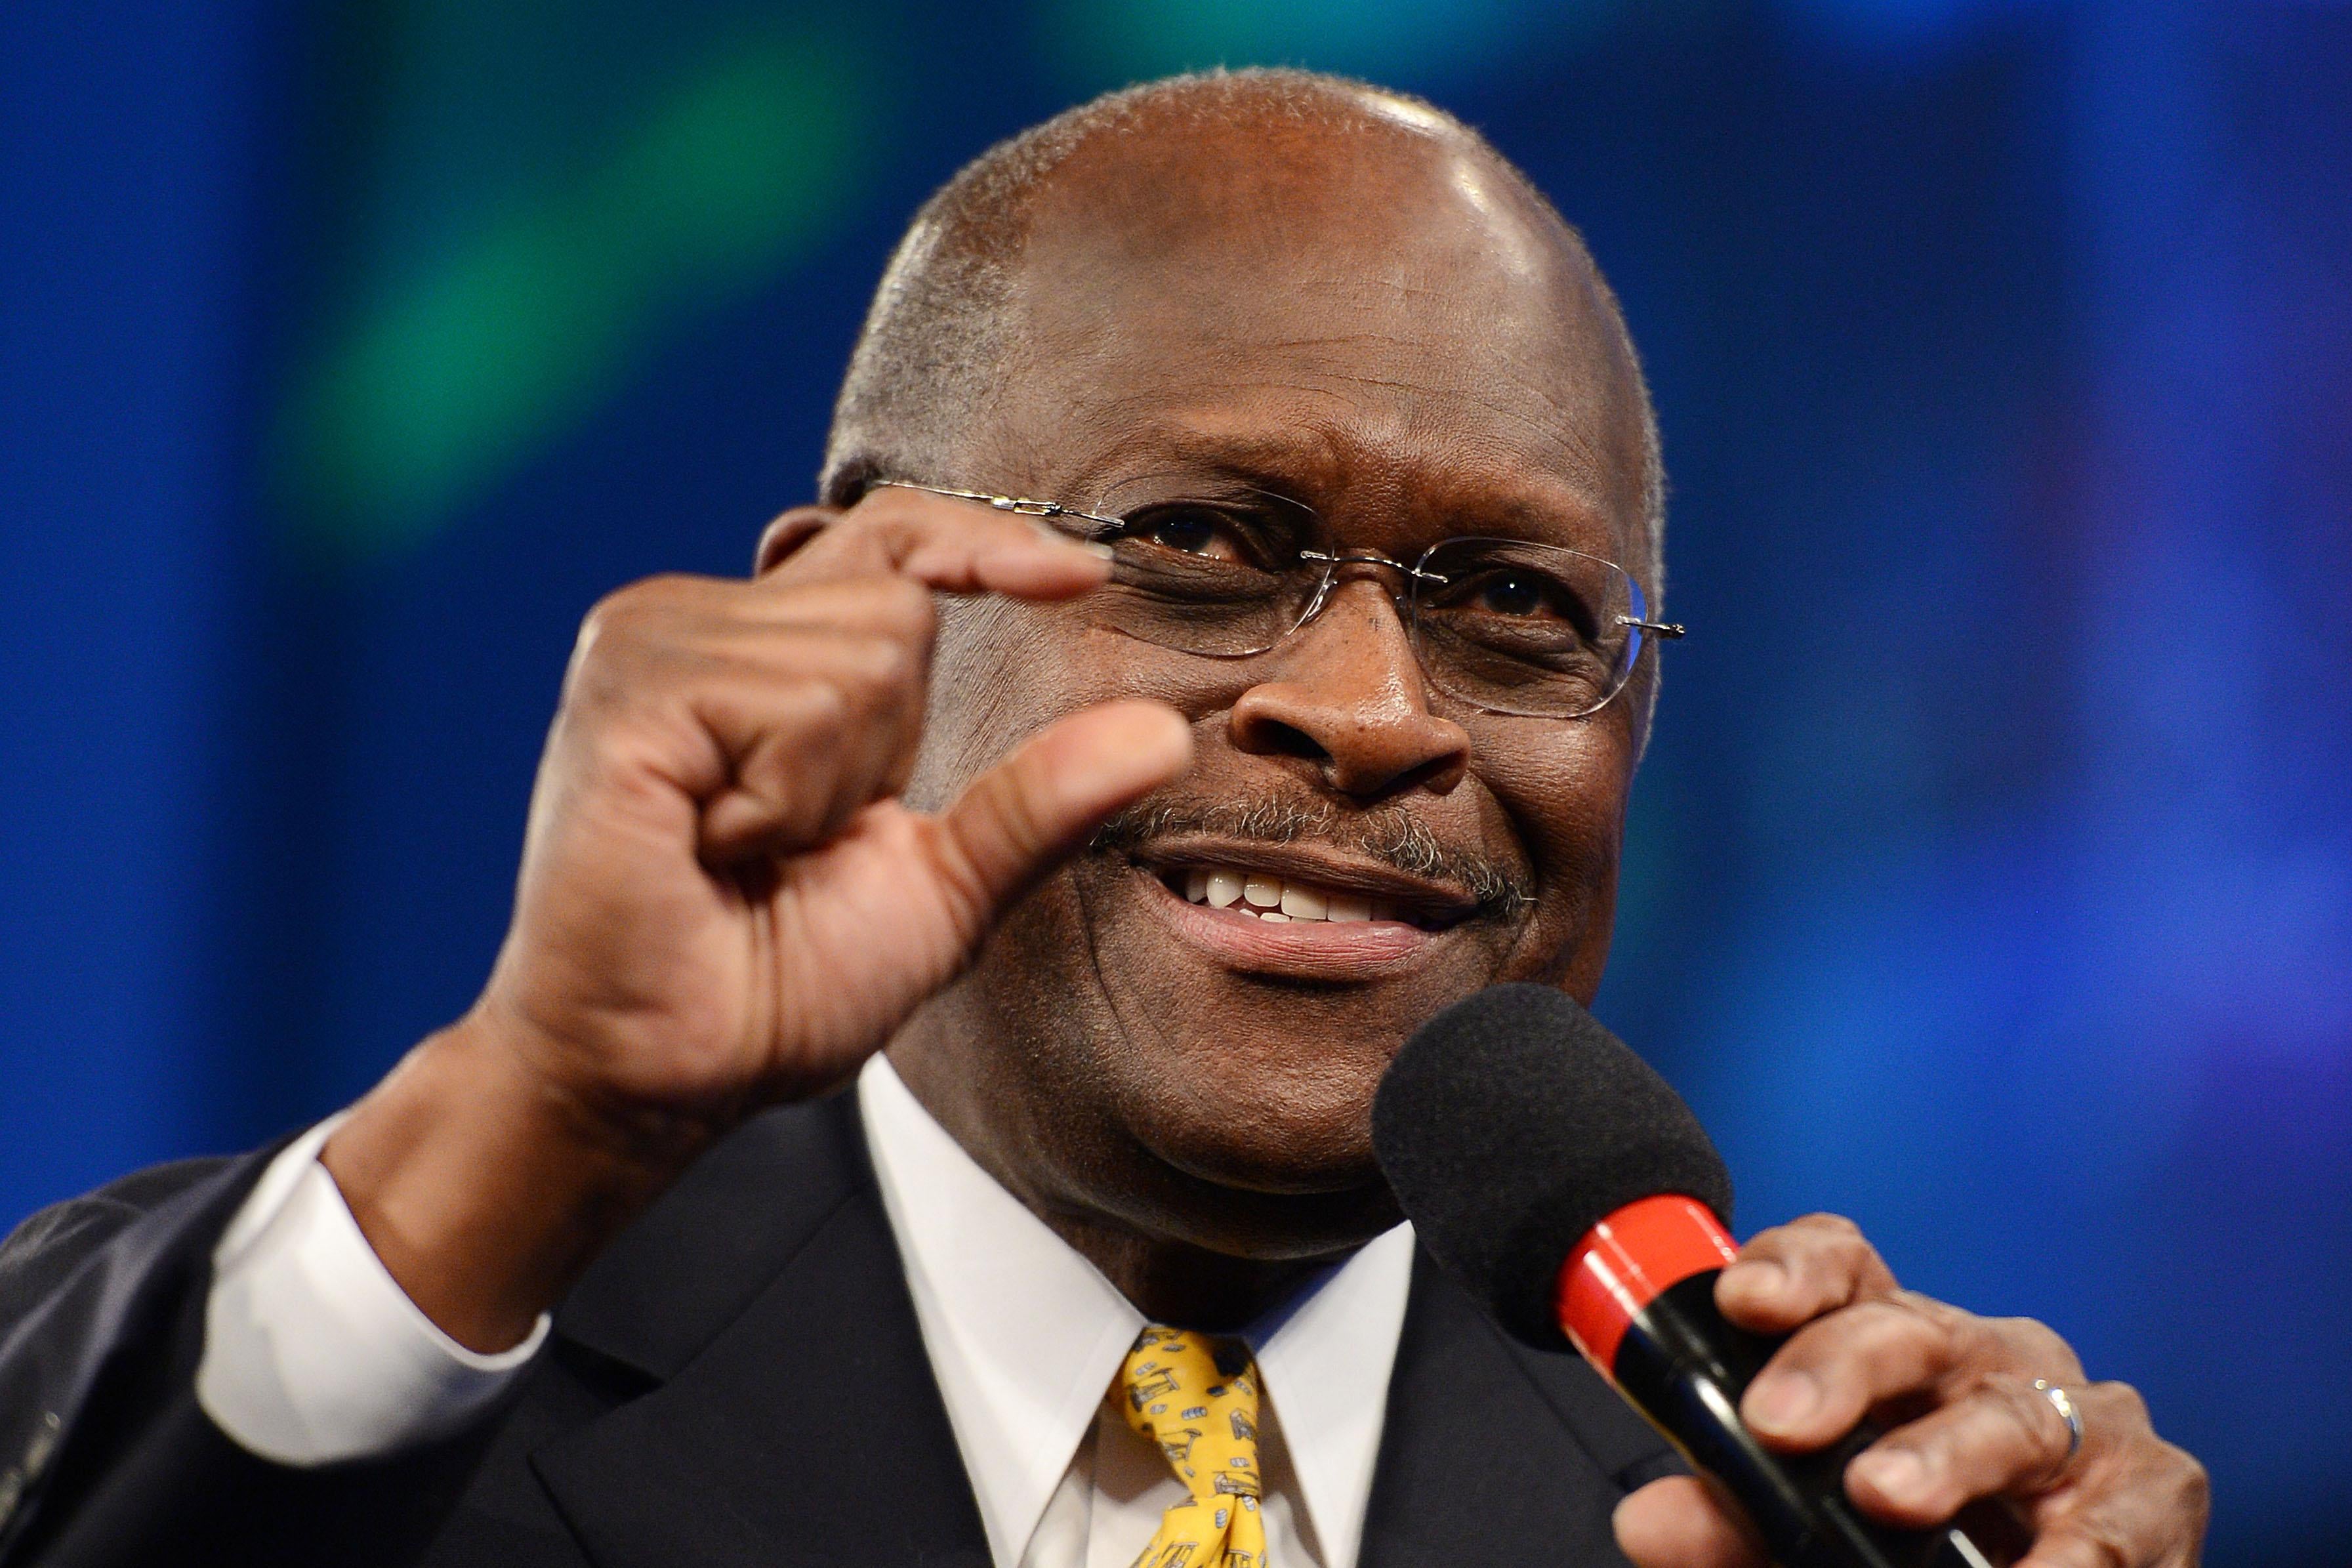 Herman Cain holds a microphone and gestures with his other hand.